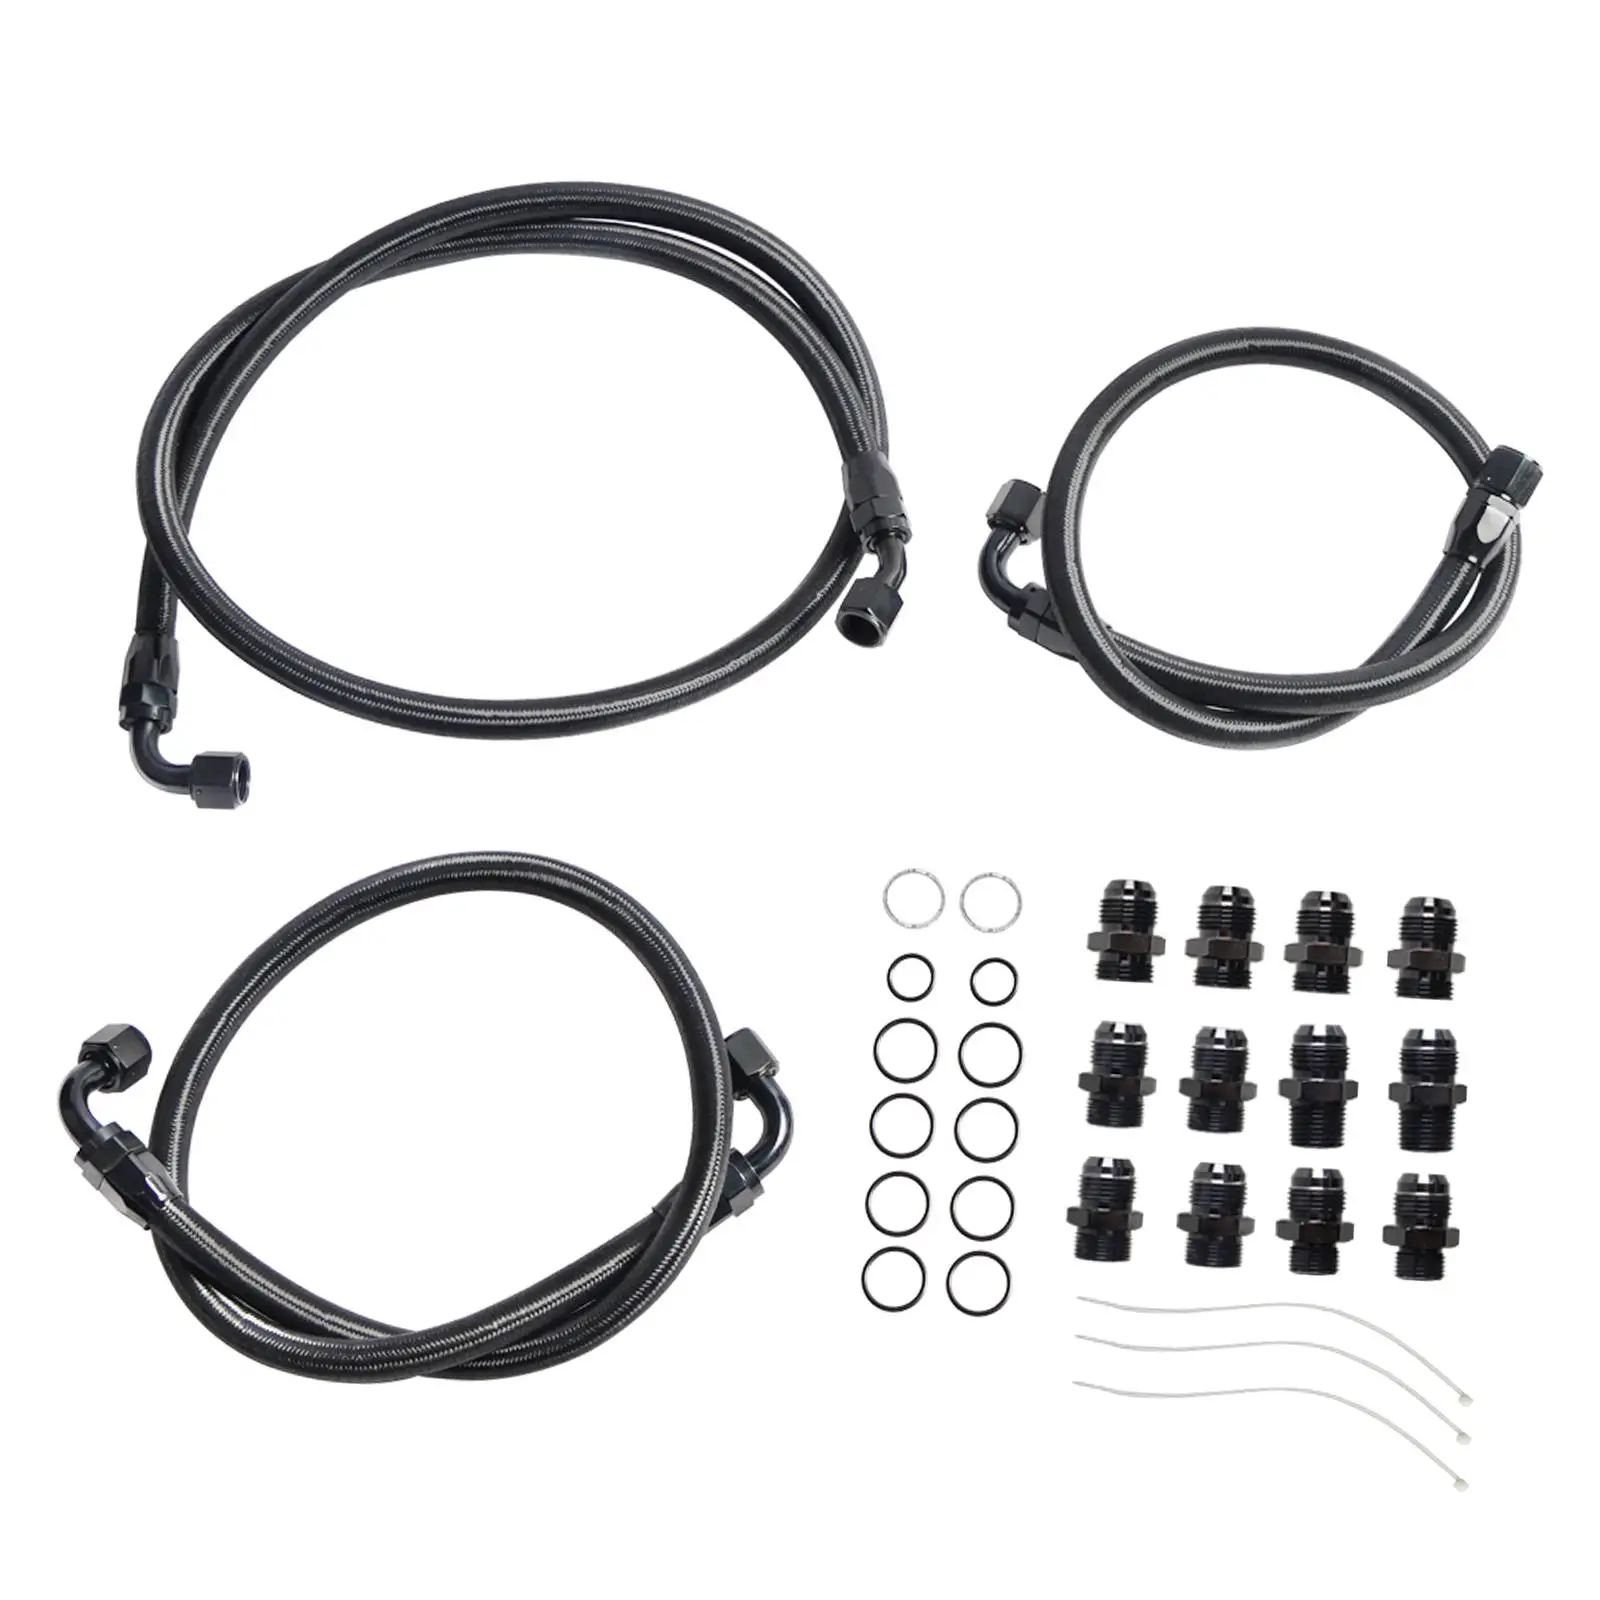 Transmission Oil Cooler Line Durable Easy to Install Replace Parts for GMC Duramax lb7/lly 2001-2005 Automotive Accessories